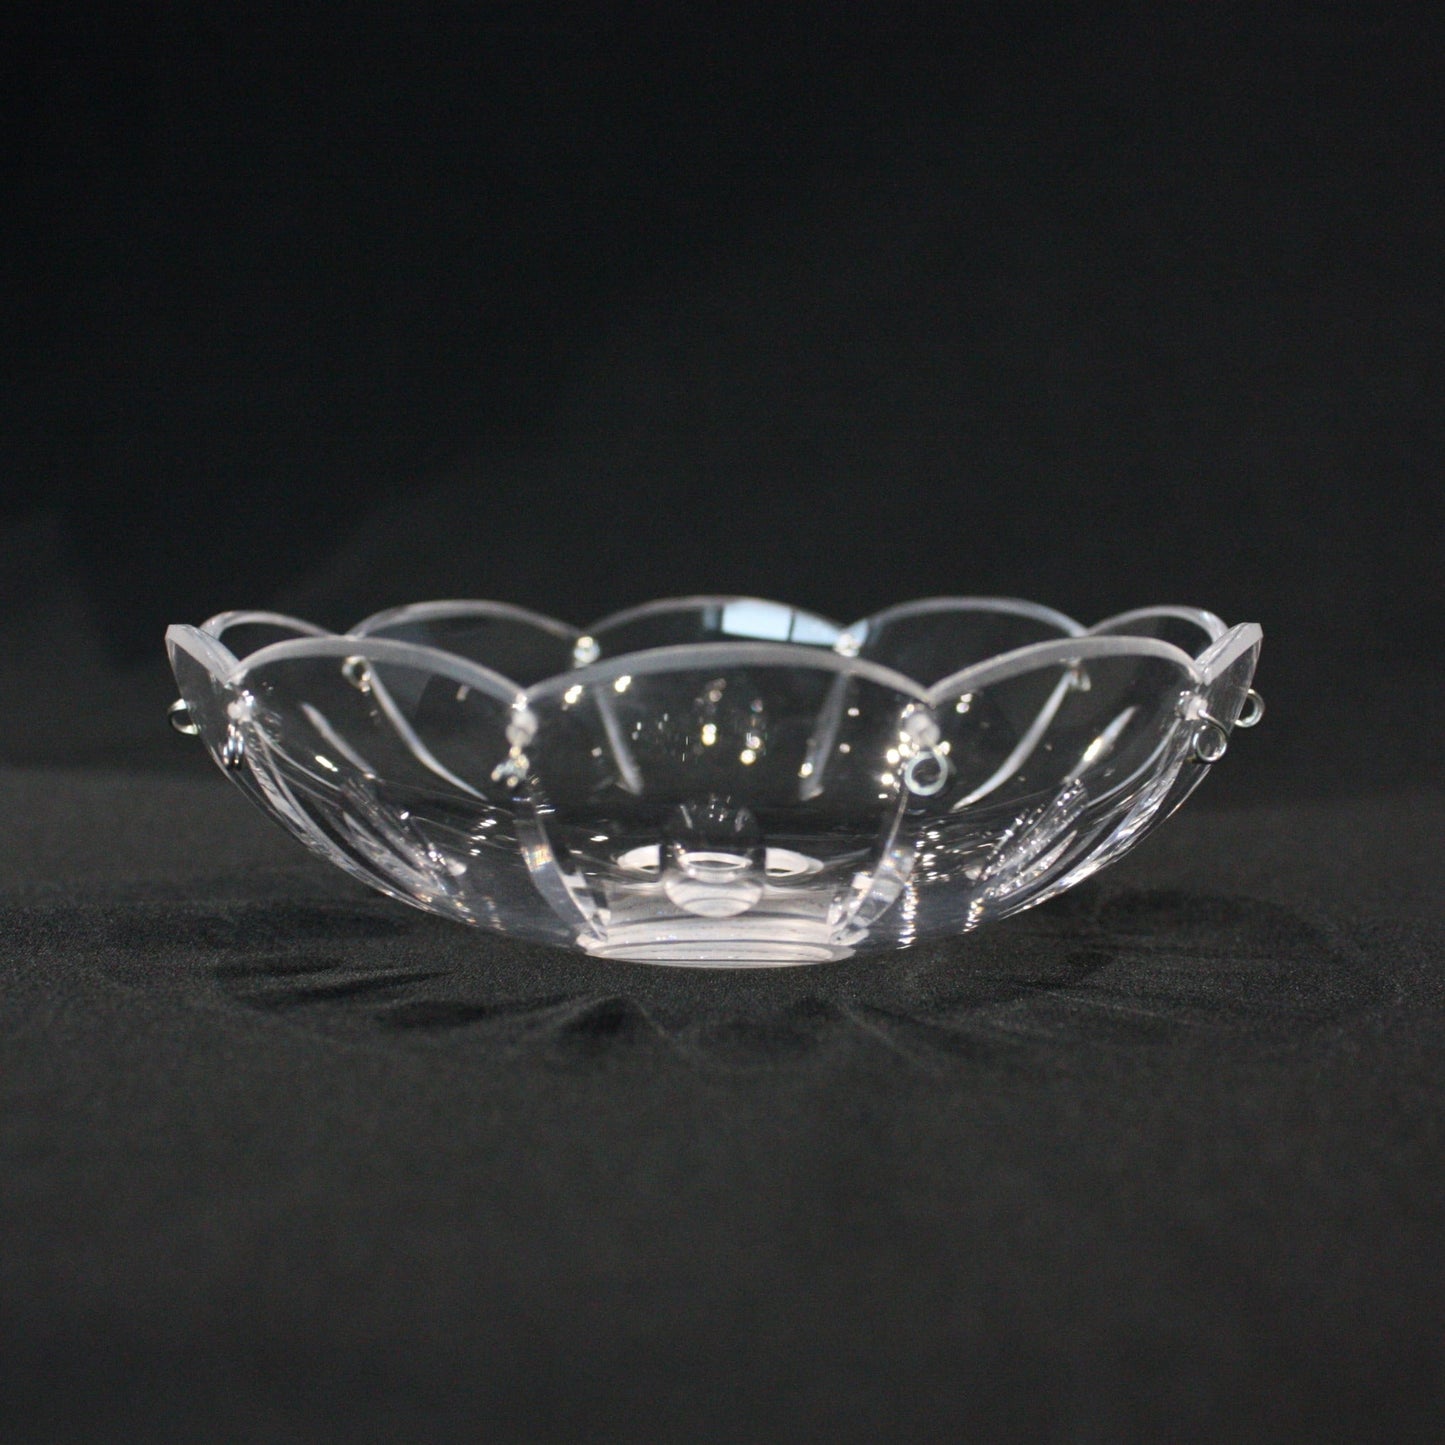 16" 28 Pin Olive & Mitre Cut Czech Crystal Bowl